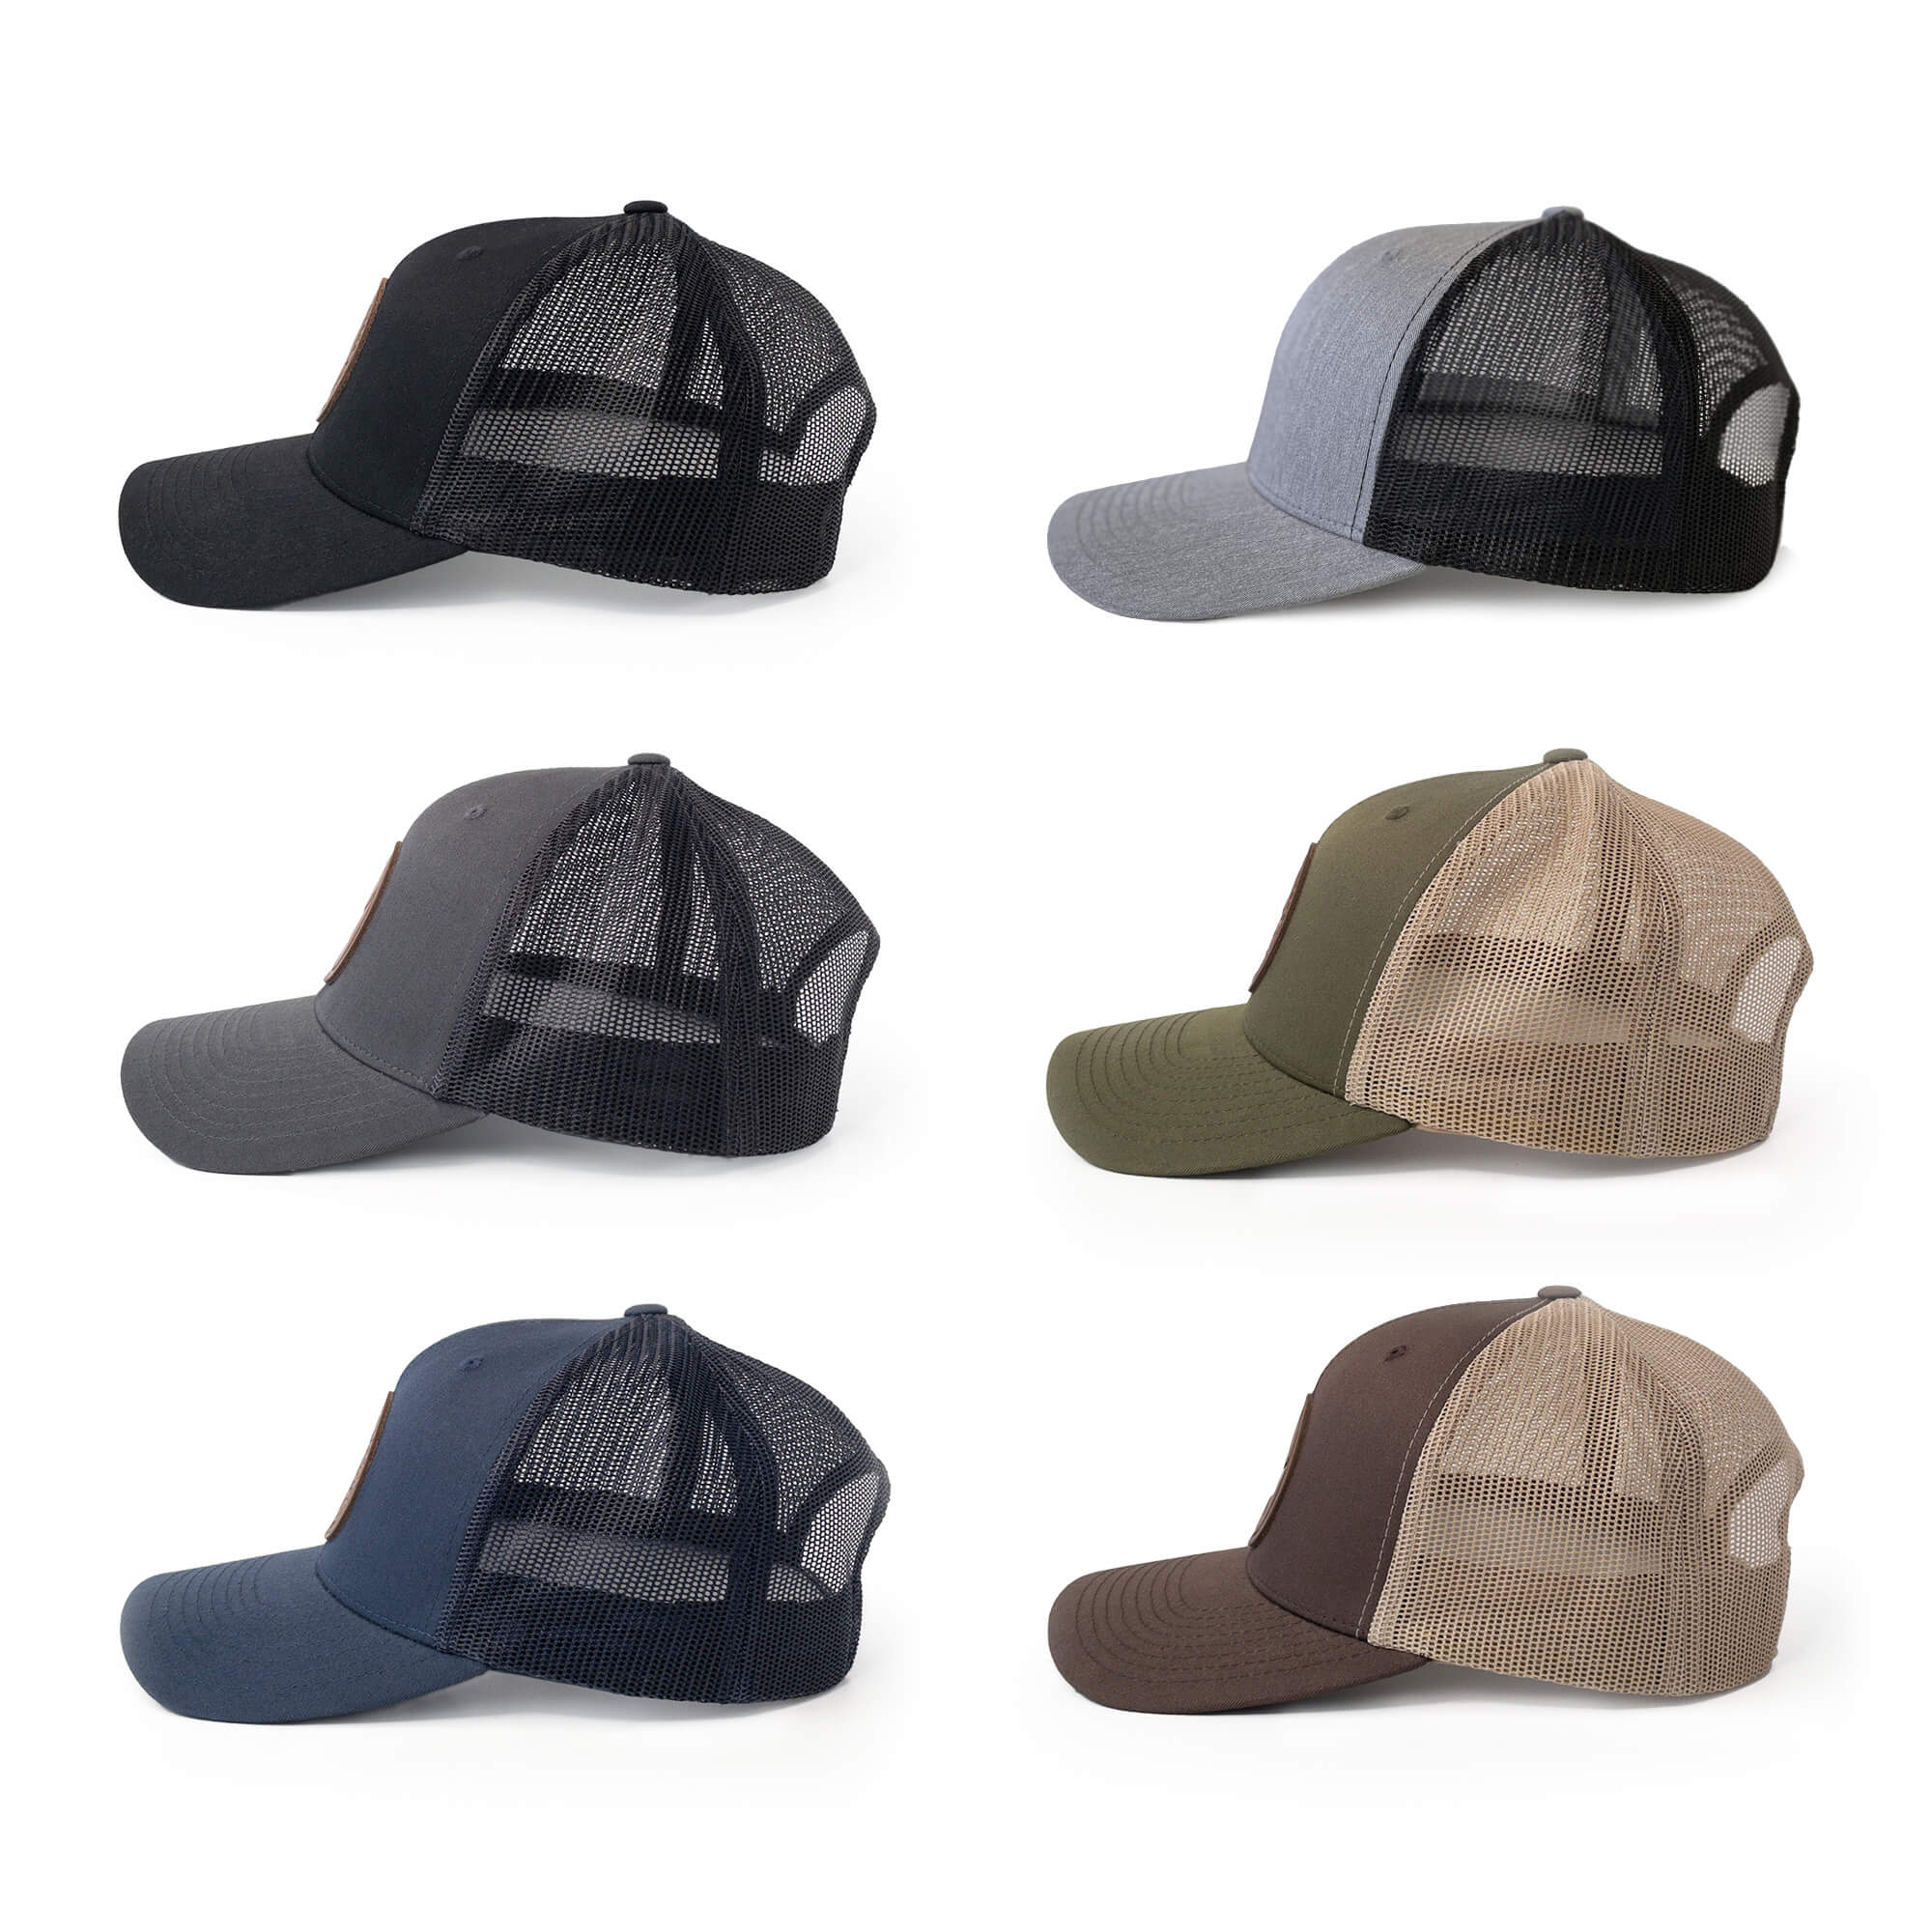 Leather patch trucker hats available in 6 colors | BLACK-003-011, CHARC-003-011, NAVY-003-011, HGREY-003-011, MOSS-003-011, BROWN-003-011